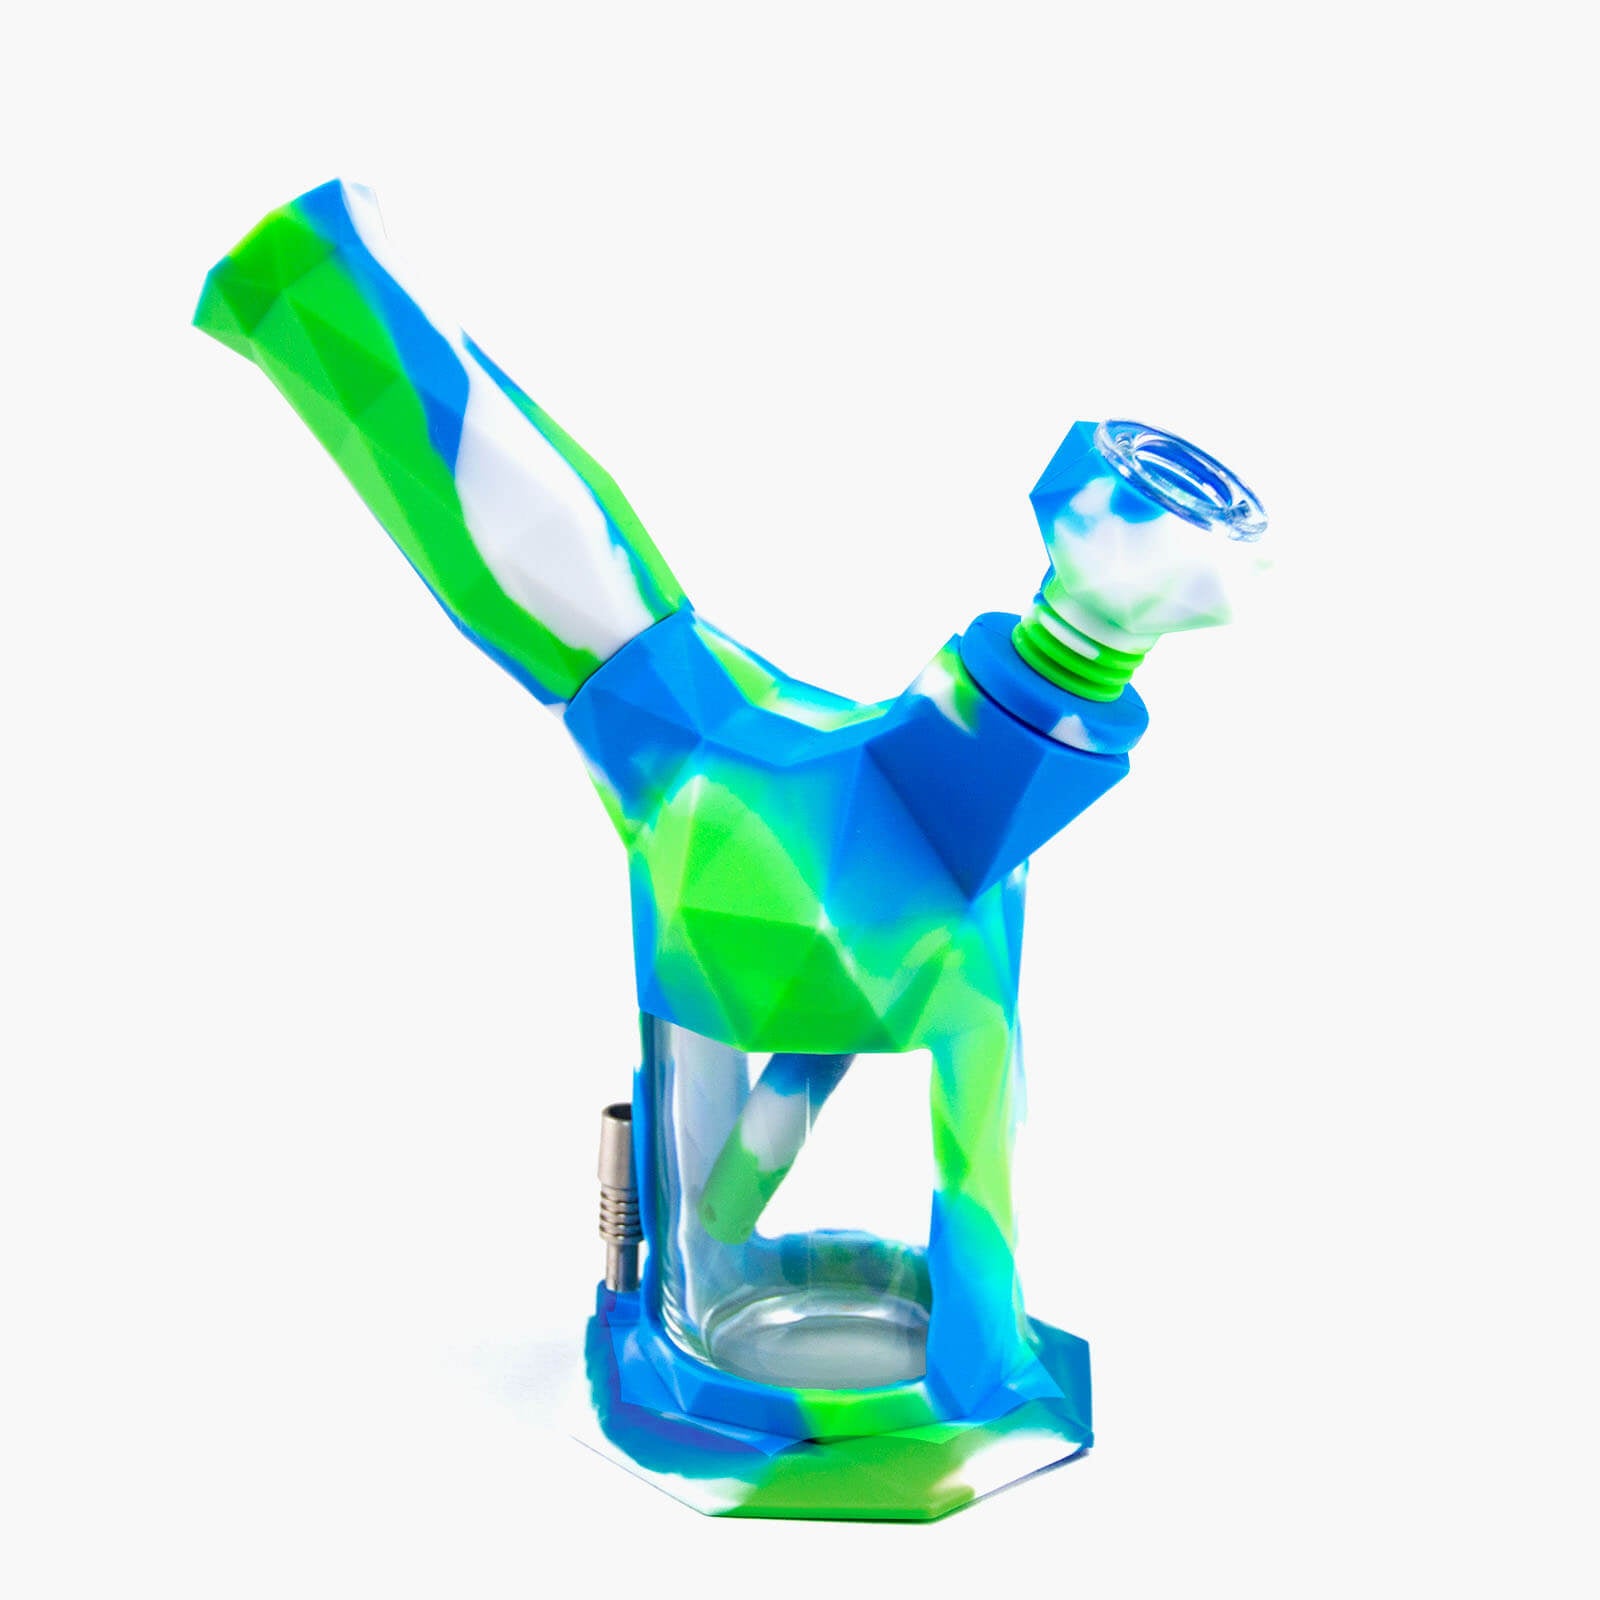 Gemini All-in-one Water Pipe - INHALCO